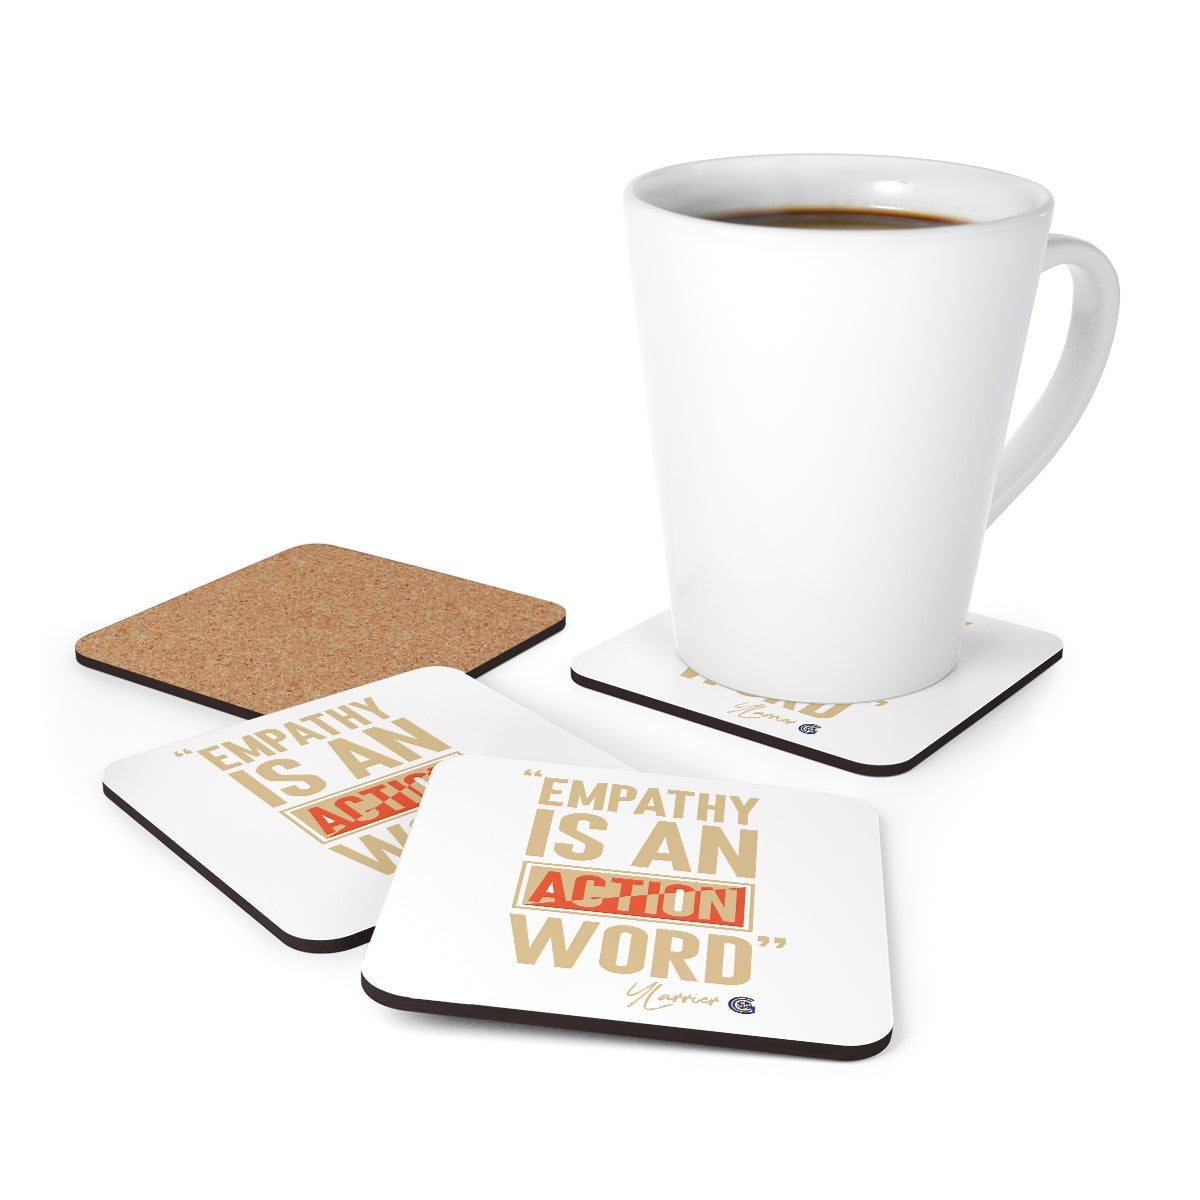 Empathy is an Action Word Coaster Set